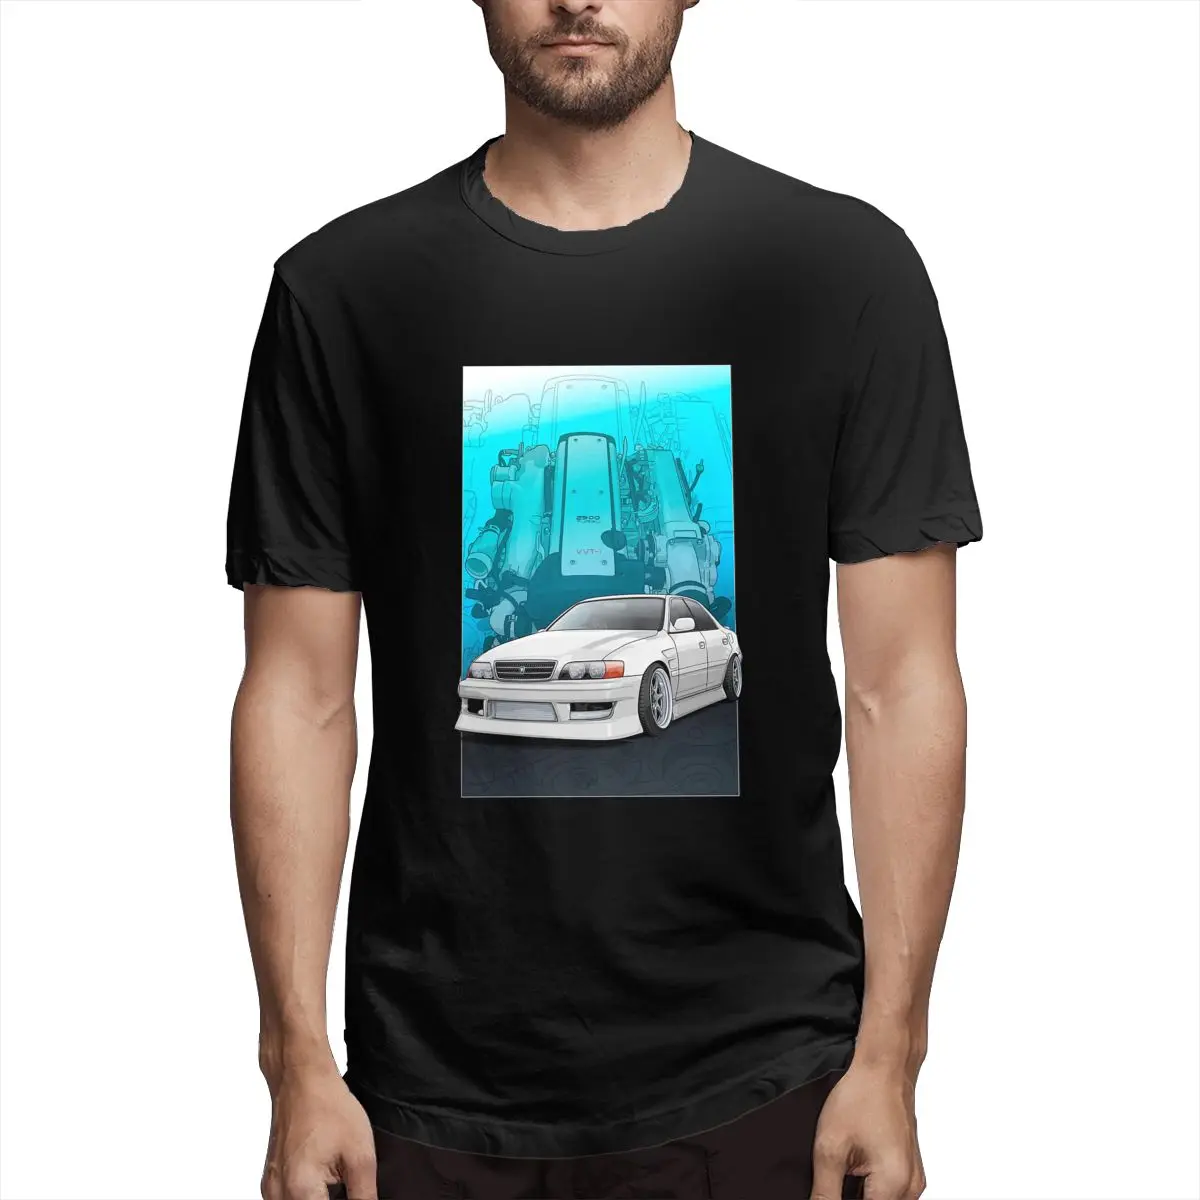 

Chaser Jzx100 (white) With 1jz Engine Background, Essential T Shir Car Culture Men T Shirt Humorous Tees Short Sleeve